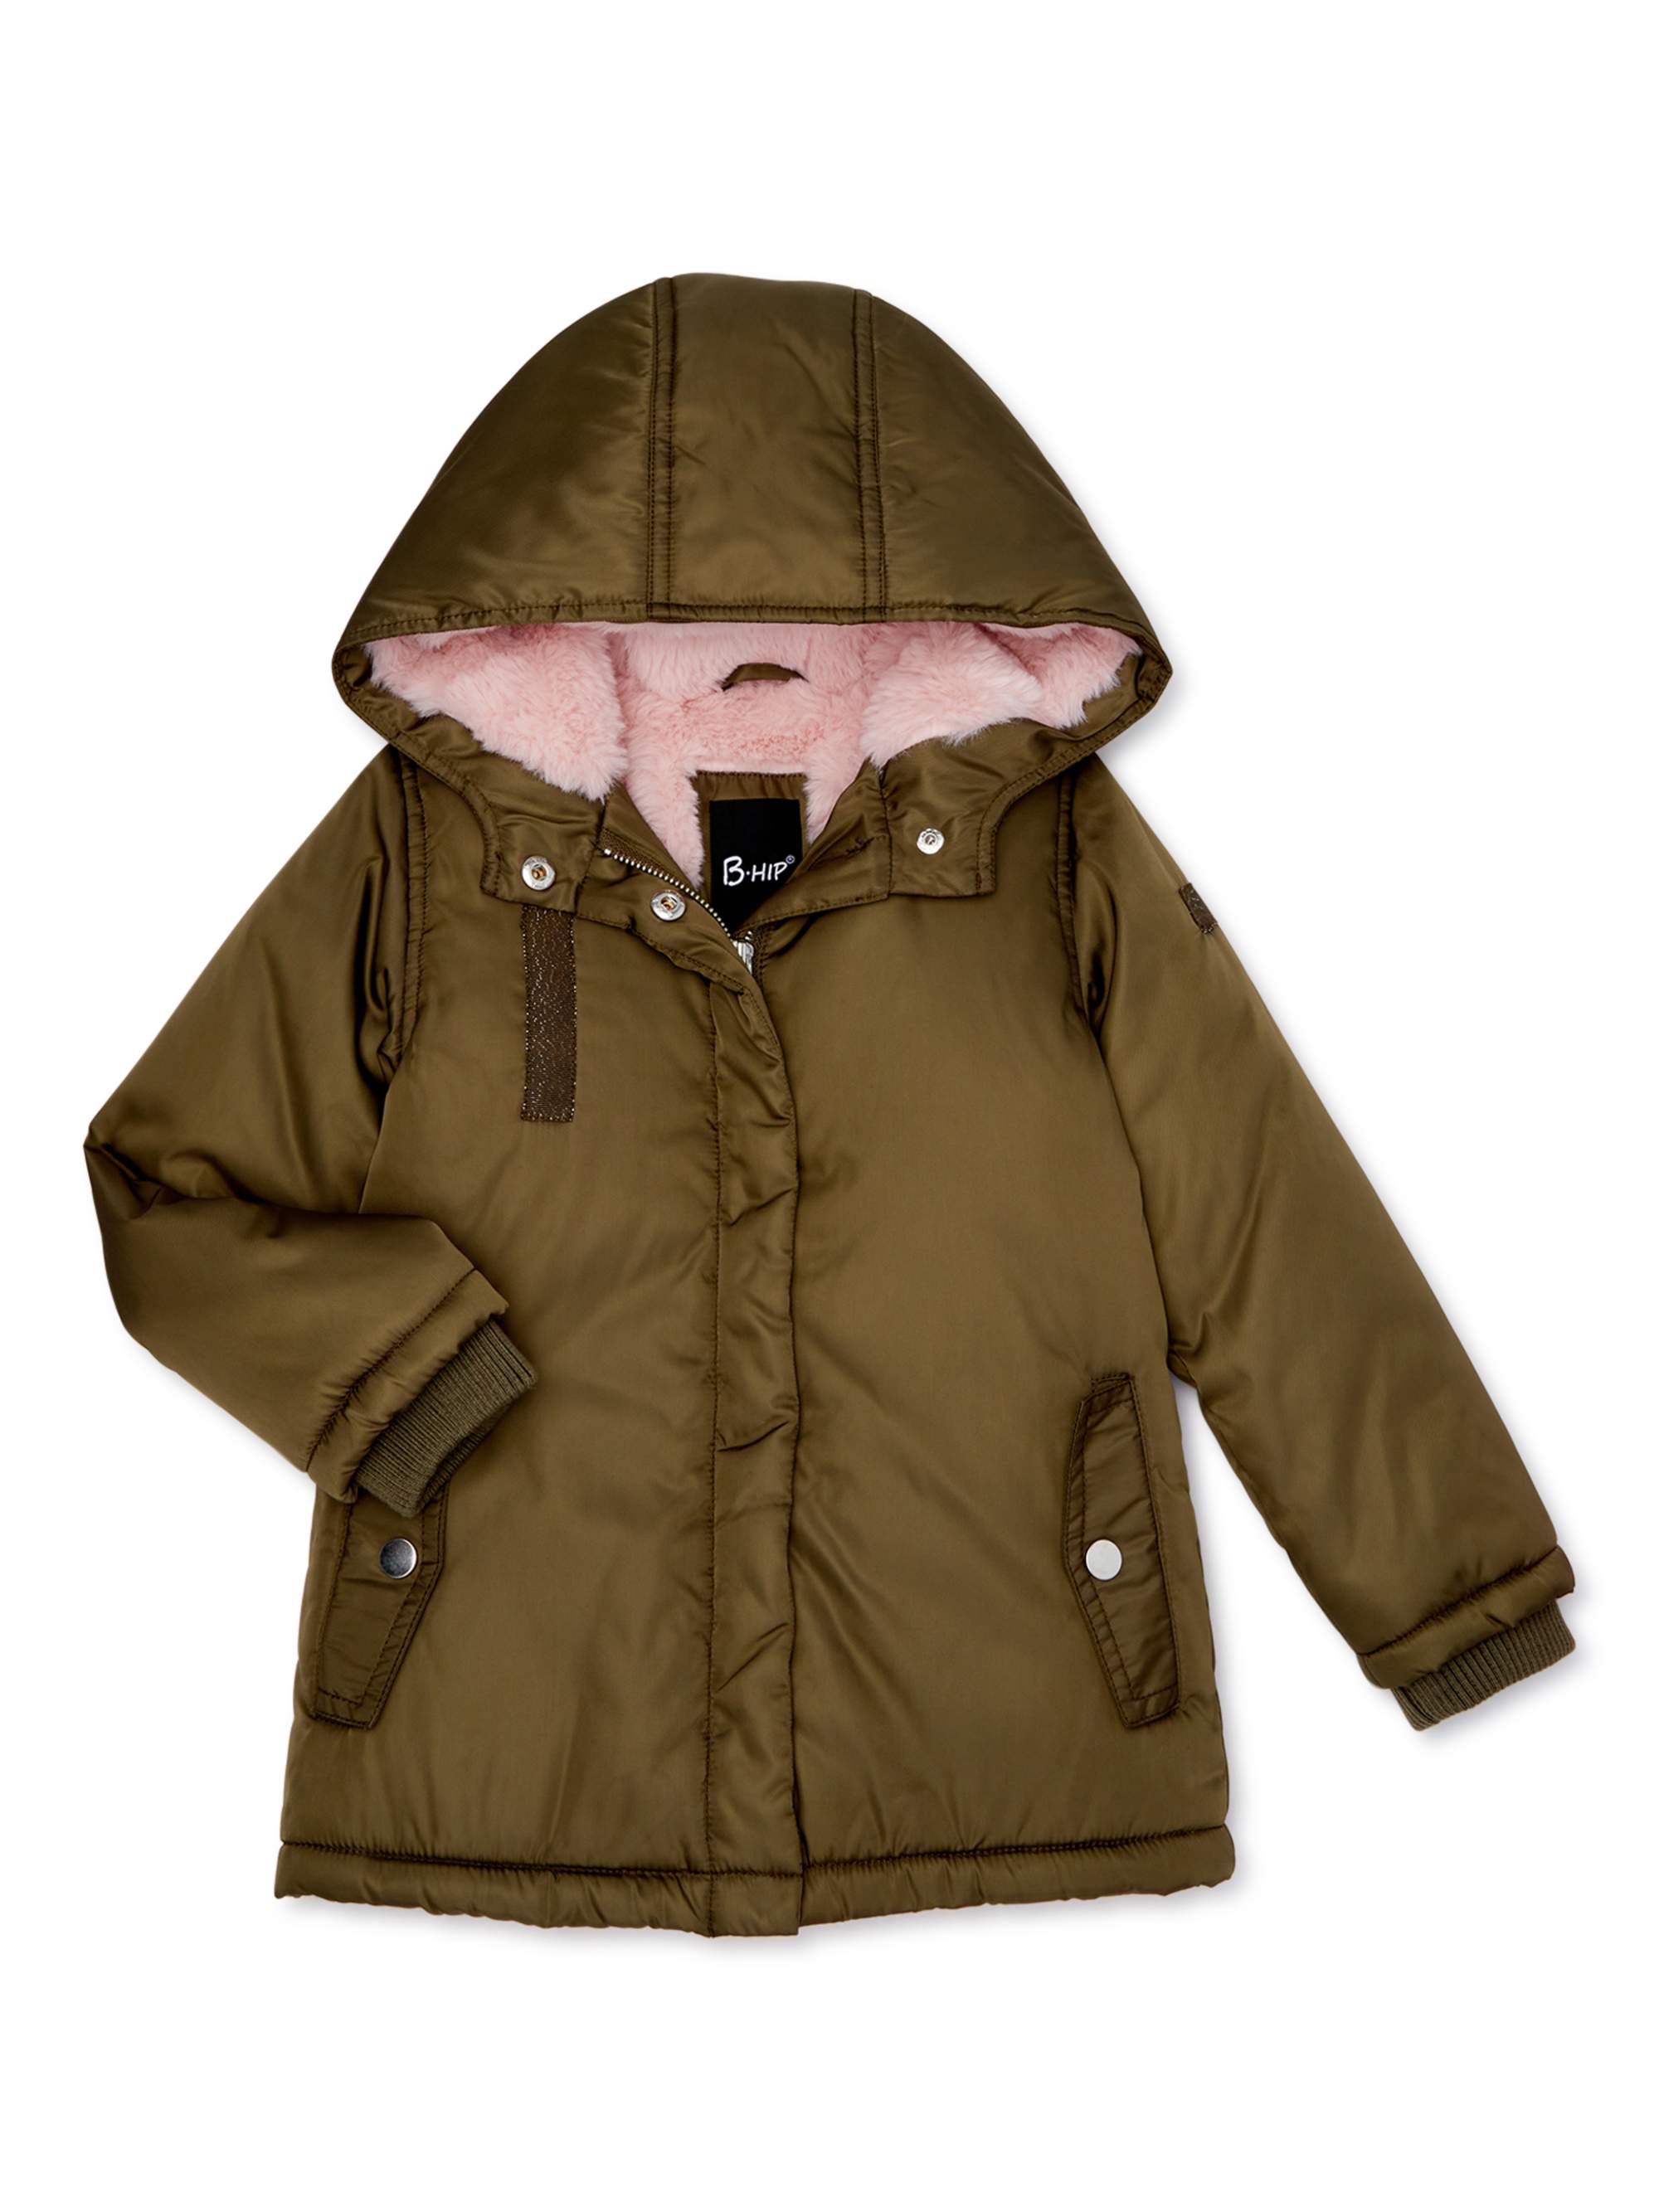 Bhip Girls 4-16 Heavy Weight Lined Parka Coat - image 1 of 3